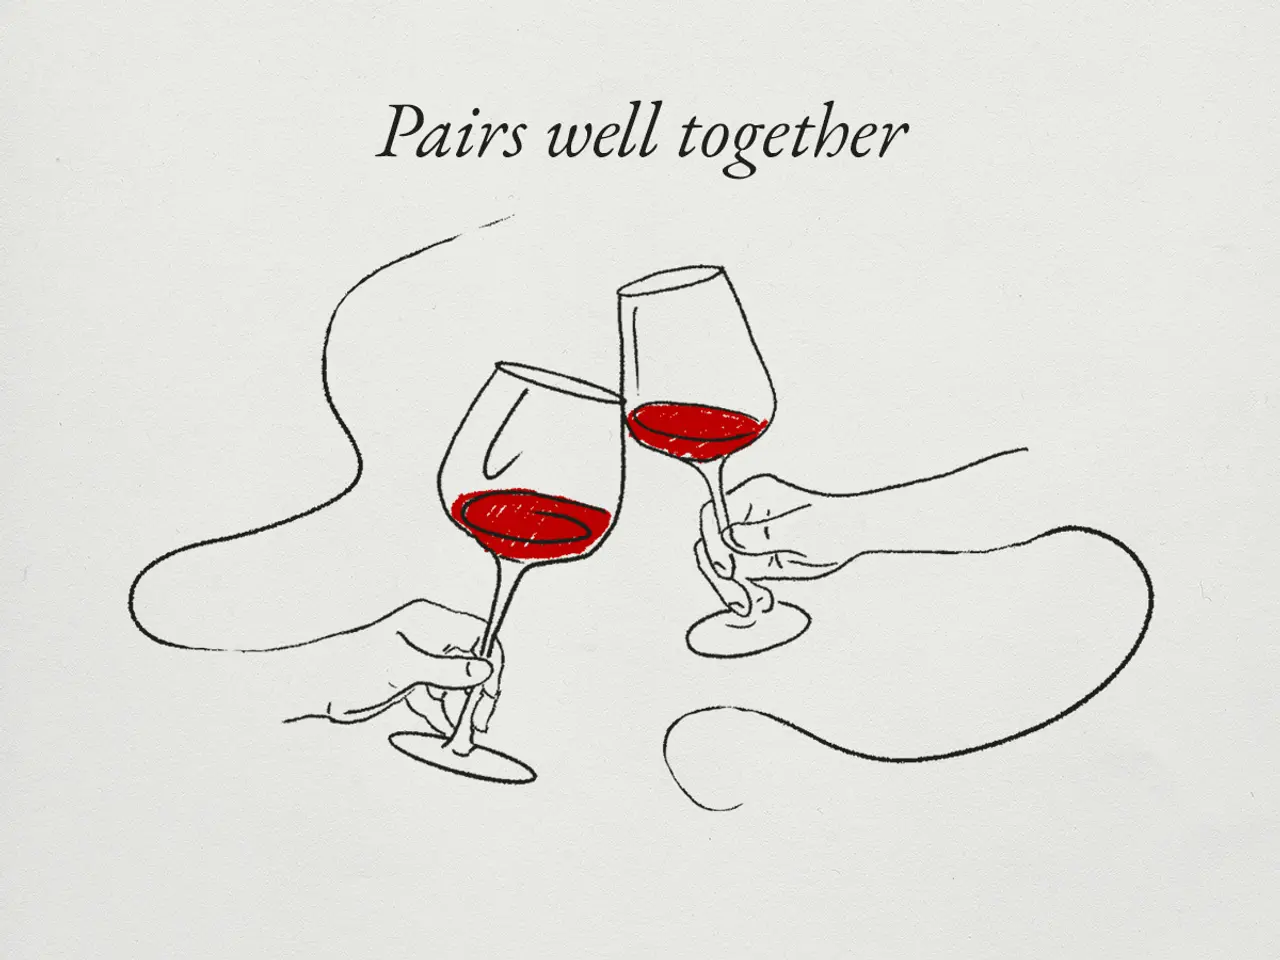 Two hands holding wine glasses in a cheers gesture with the phrase "Pairs well together" written above.